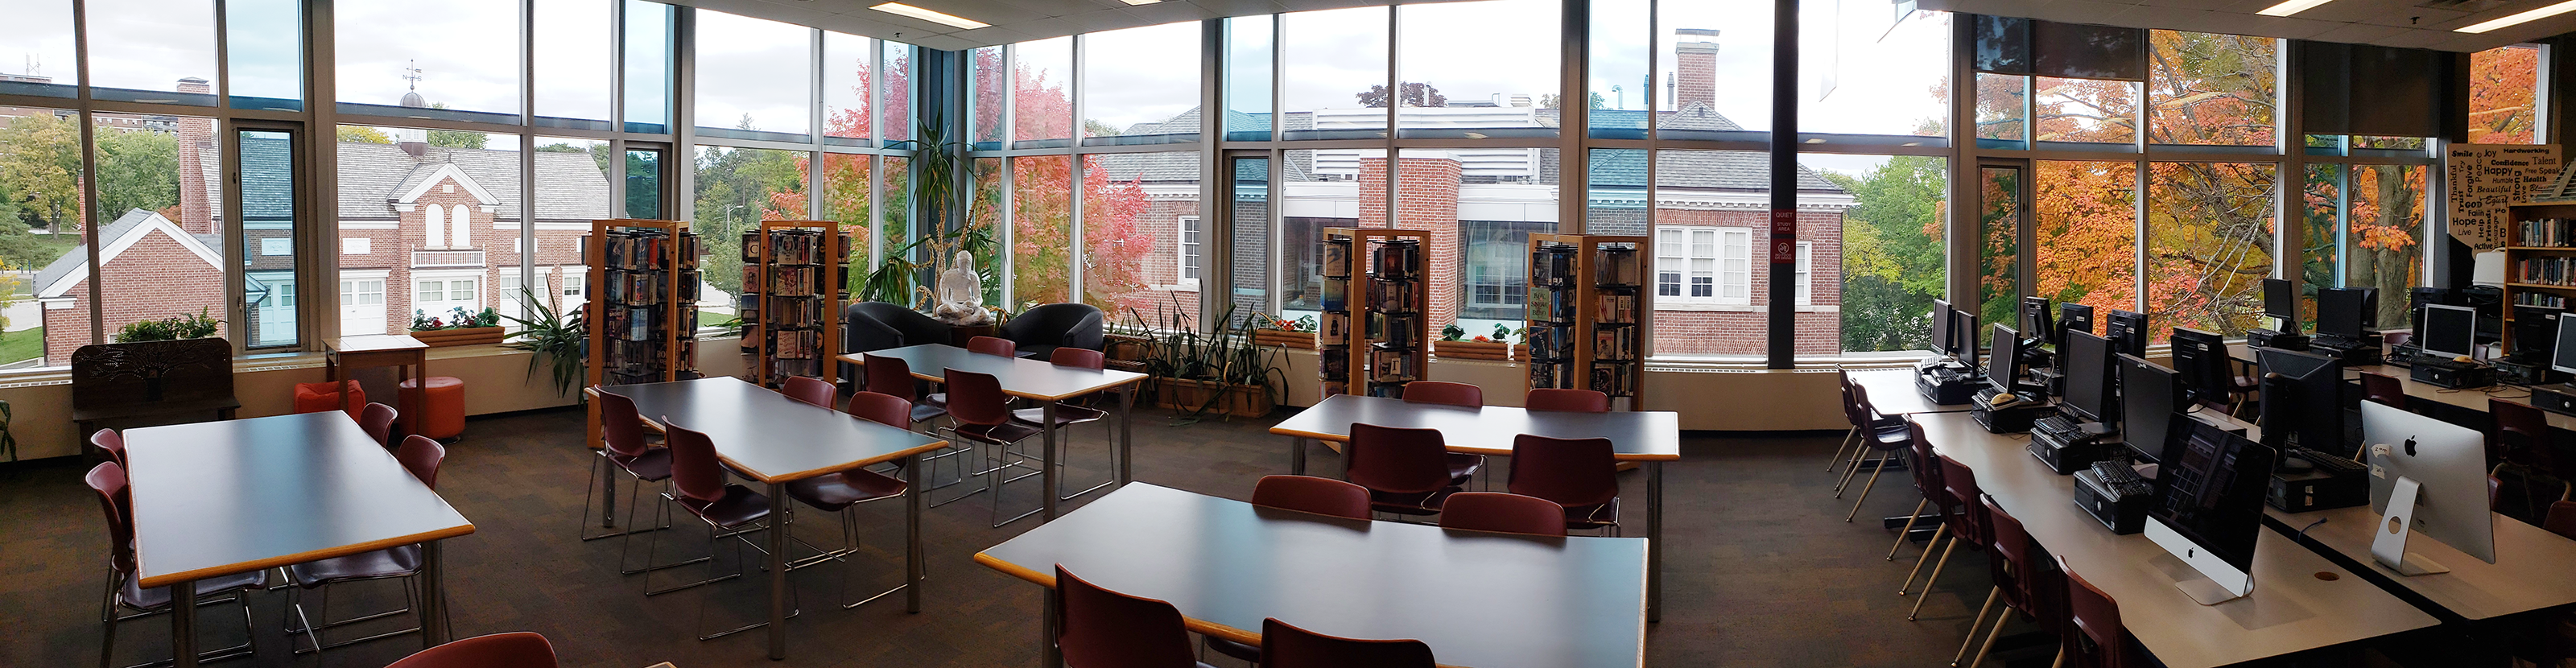 Photo of Senator O'Connor library with study areas, computer terminals, and bookshelves.